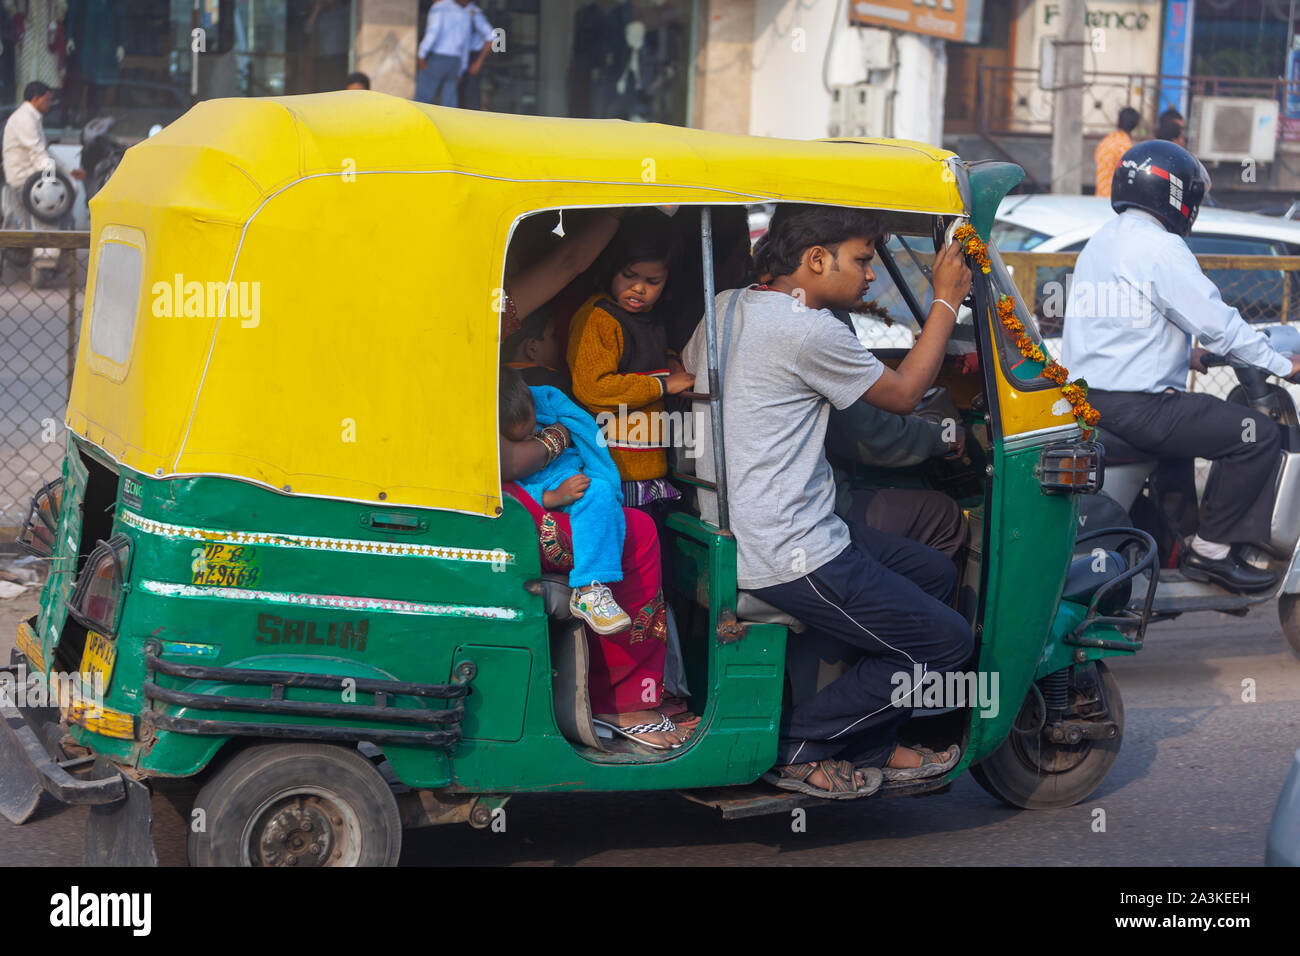 Indian people on transport Stock Photo